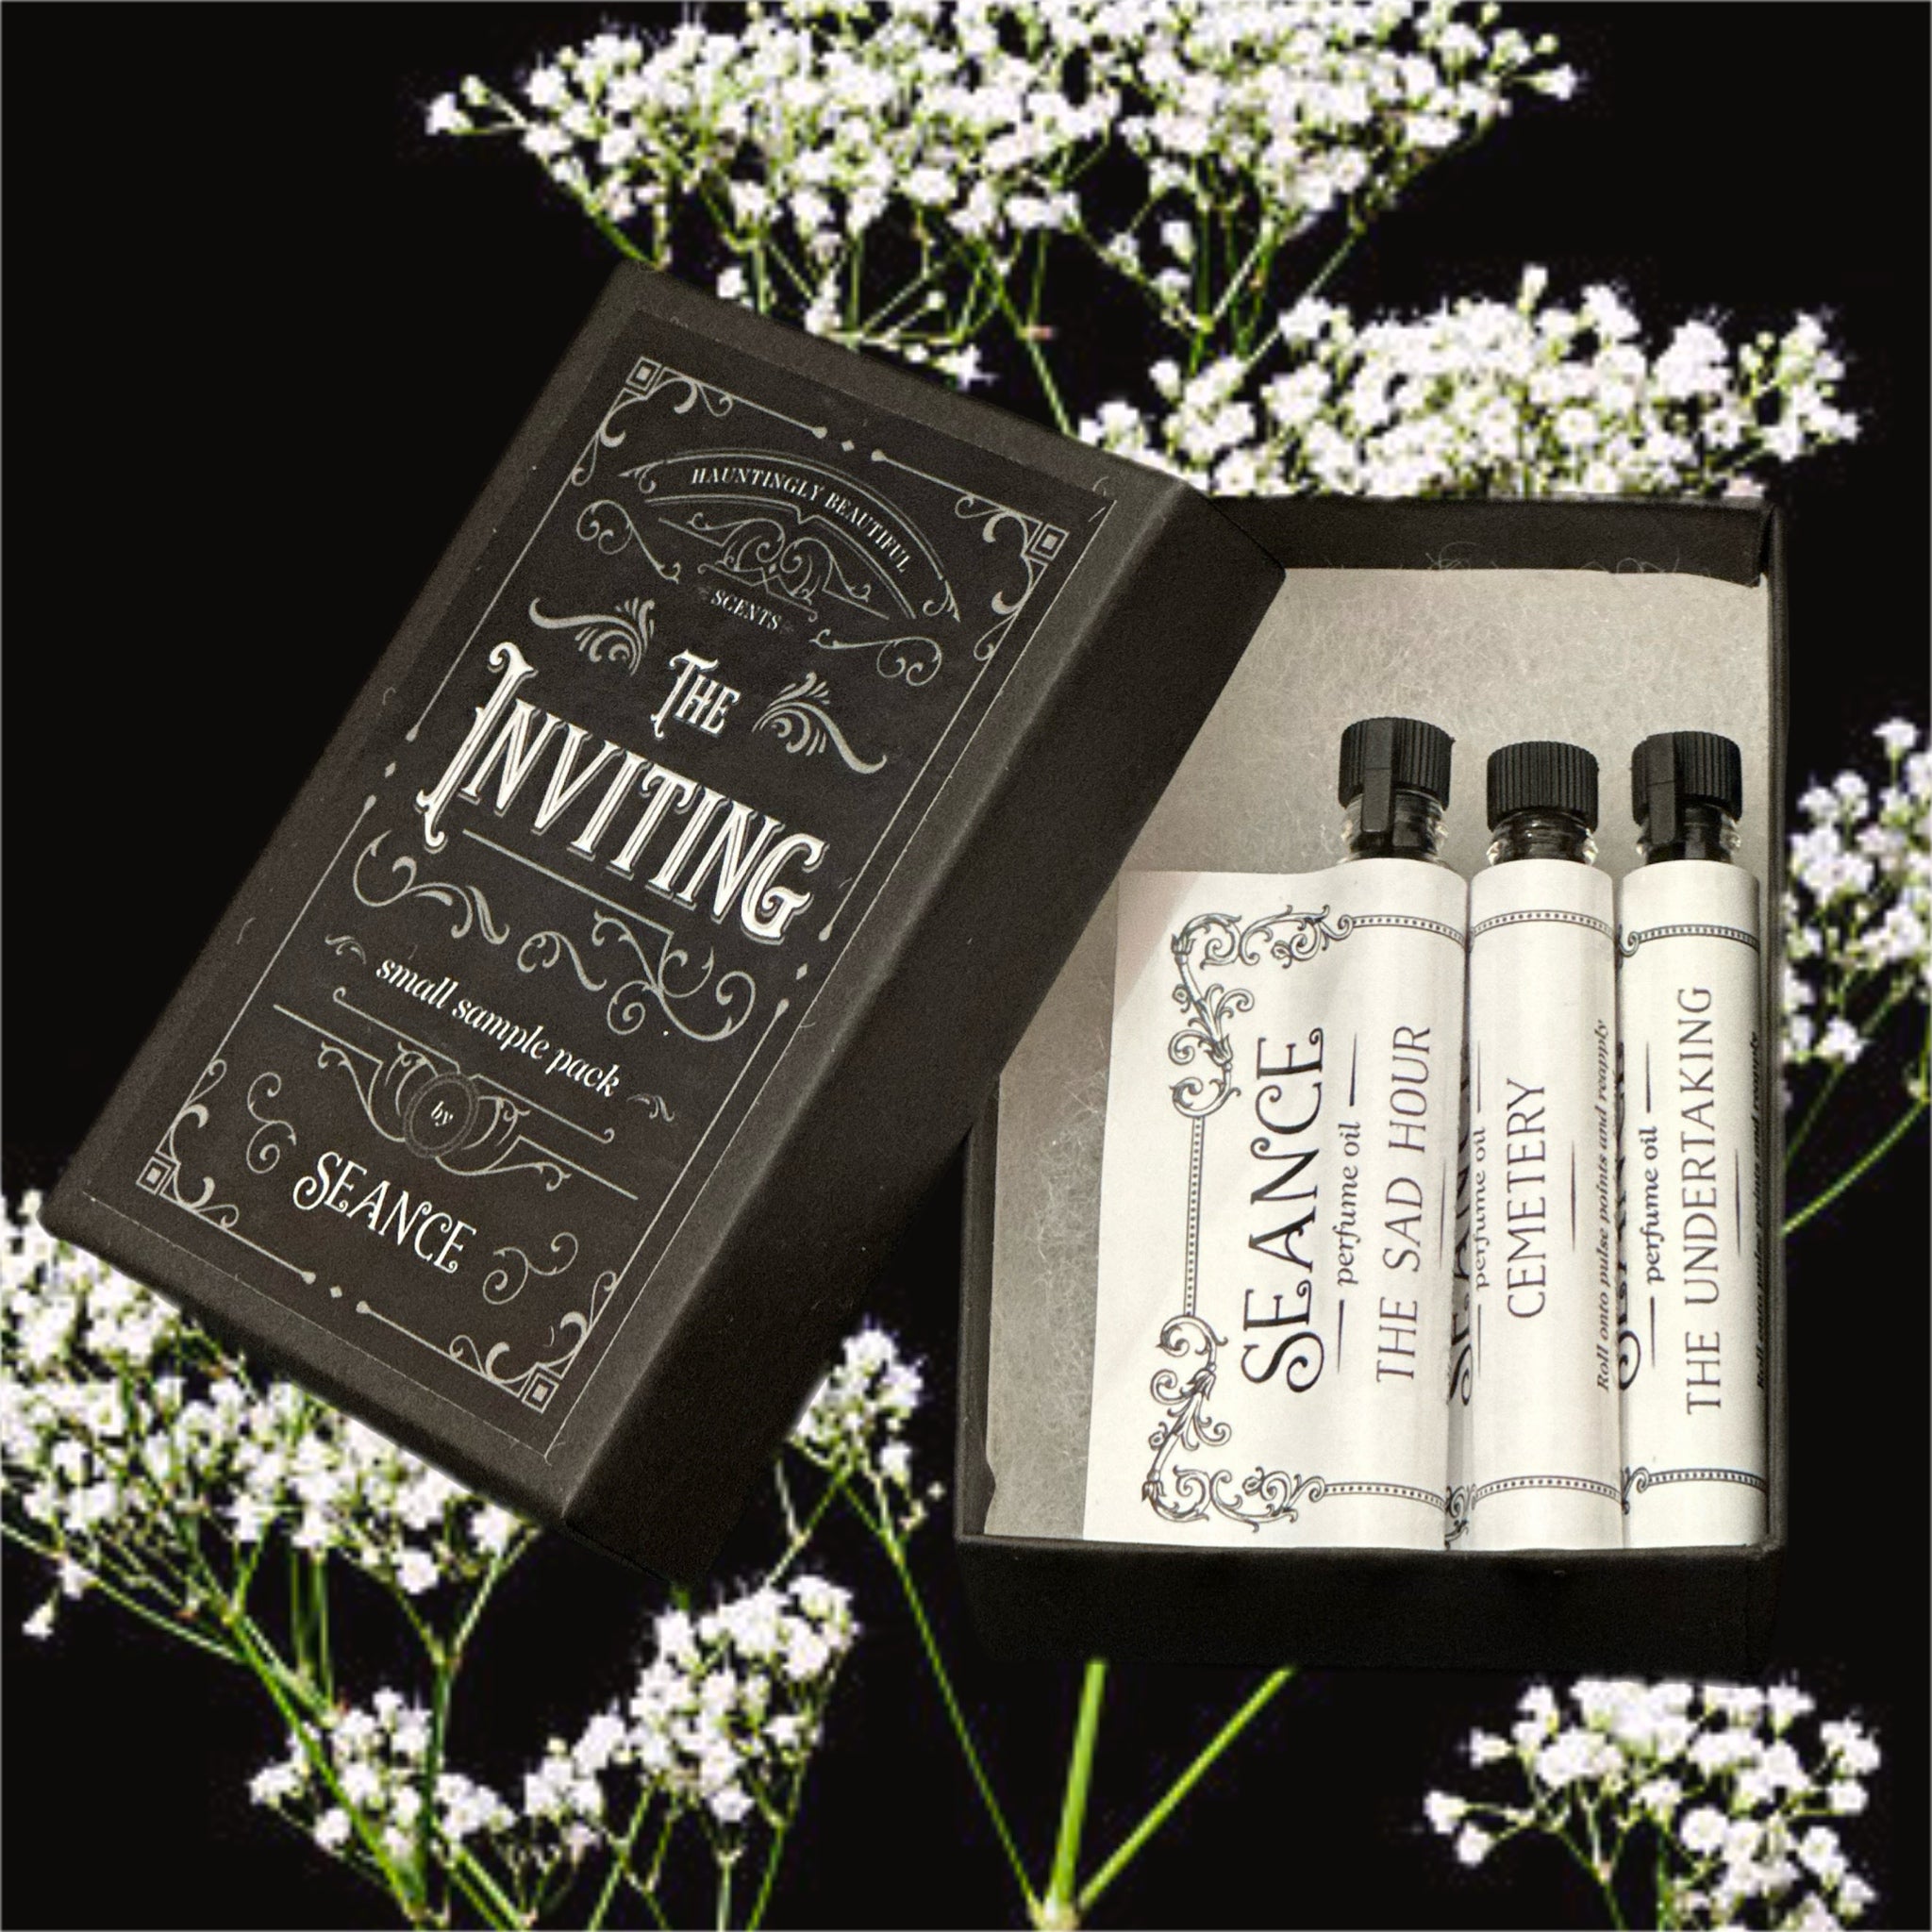 The Inviting- small sample pack (3 scents)